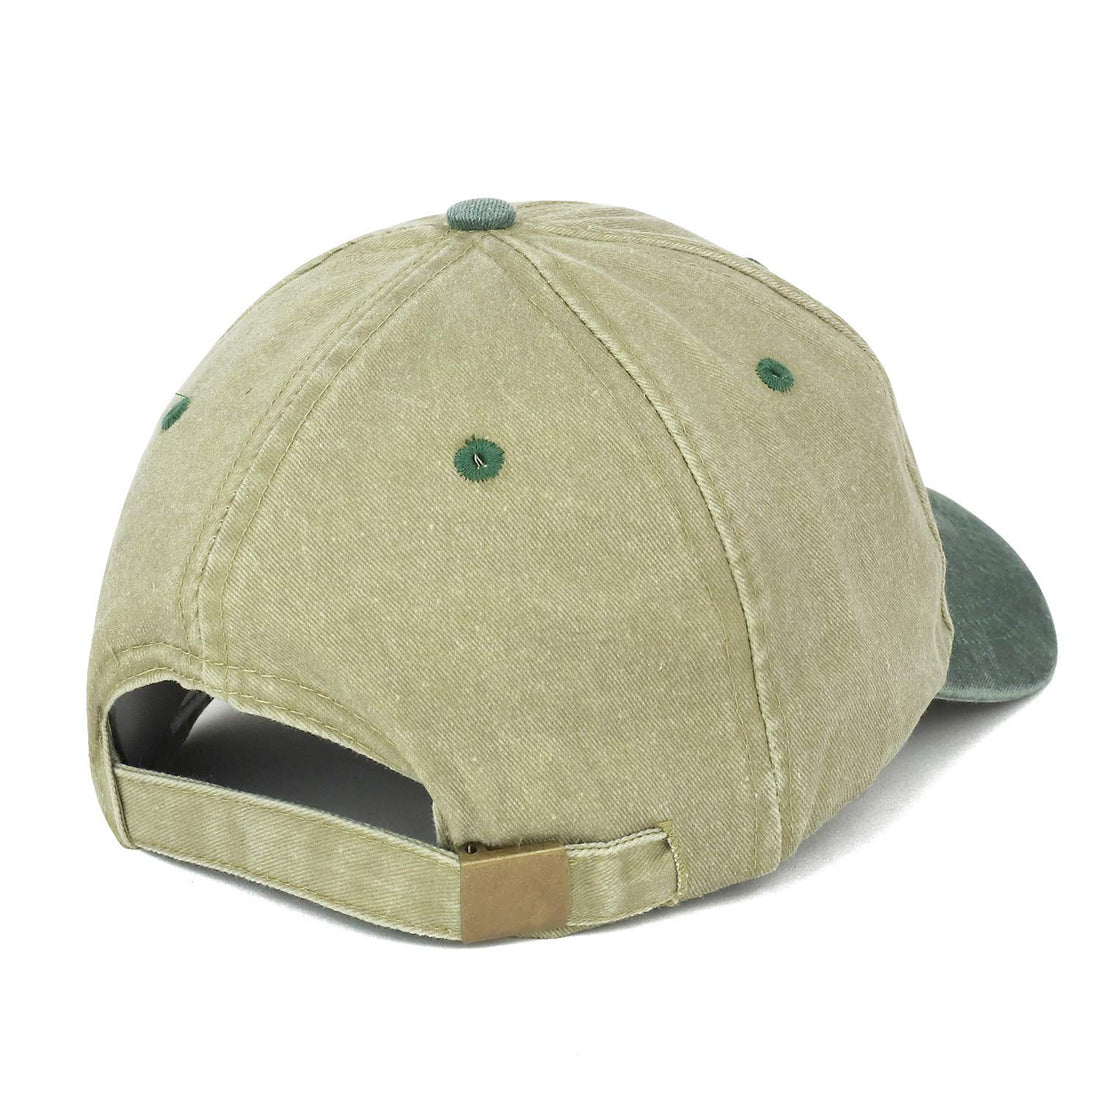 Trendy Apparel Shop Boo Patch Pigment Dyed Washed Two Tone Baseball Cap